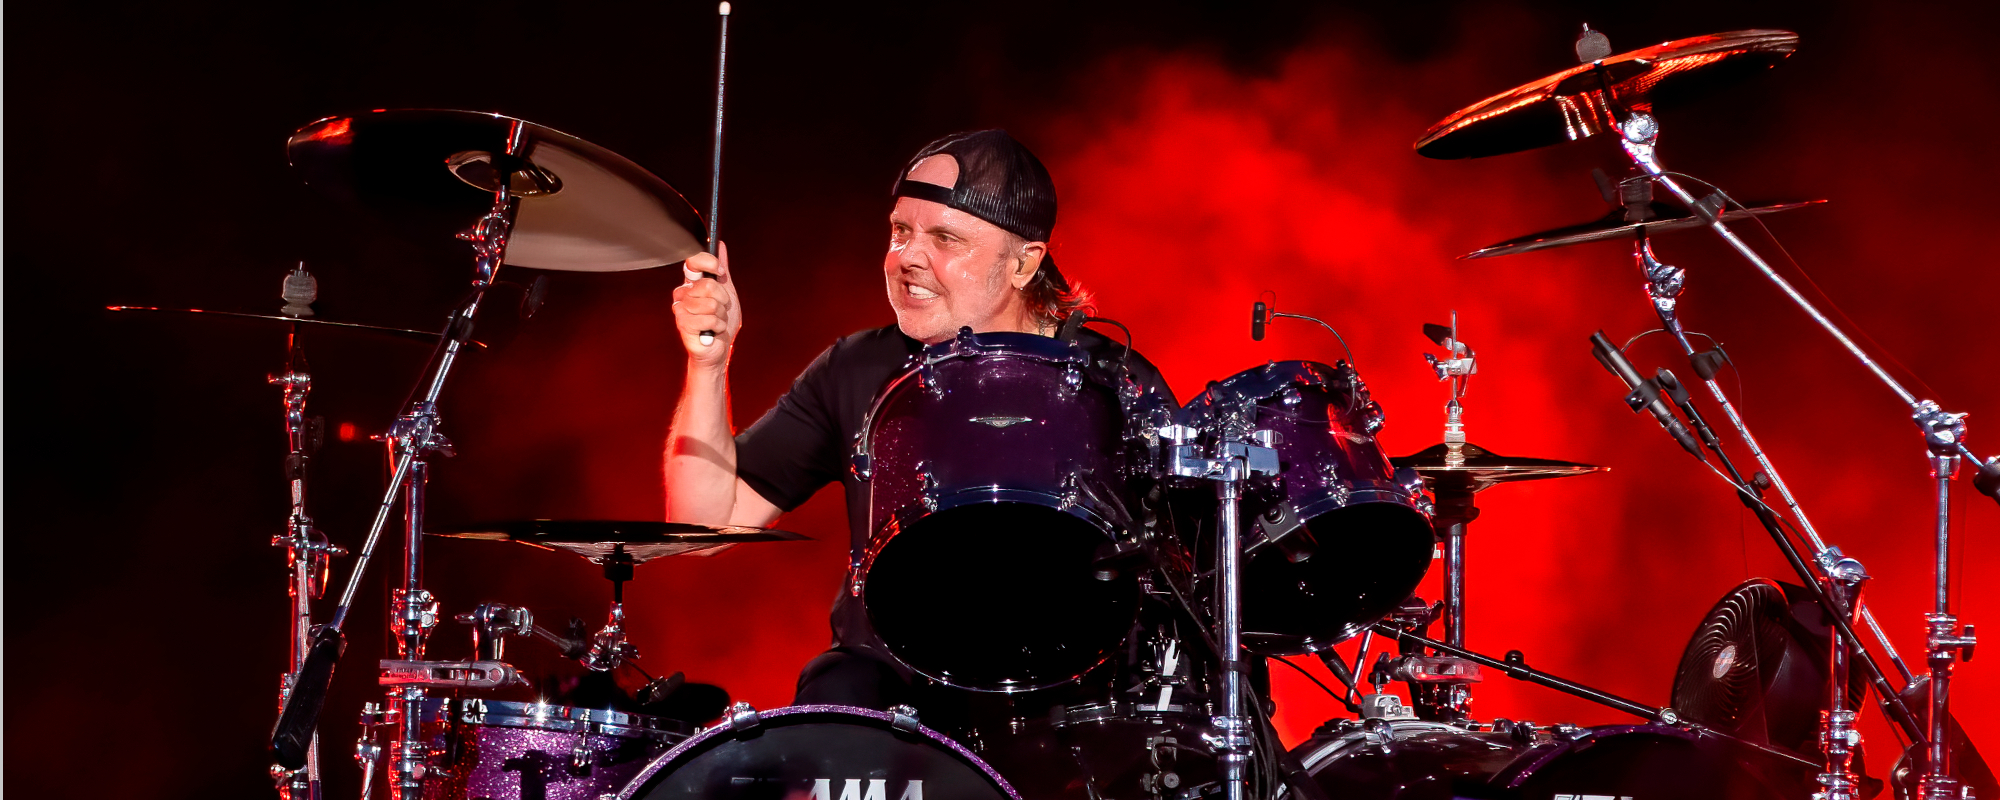 Metallica’s Lars Ulrich Pens New Introduction for Hunter S. Thompson Book